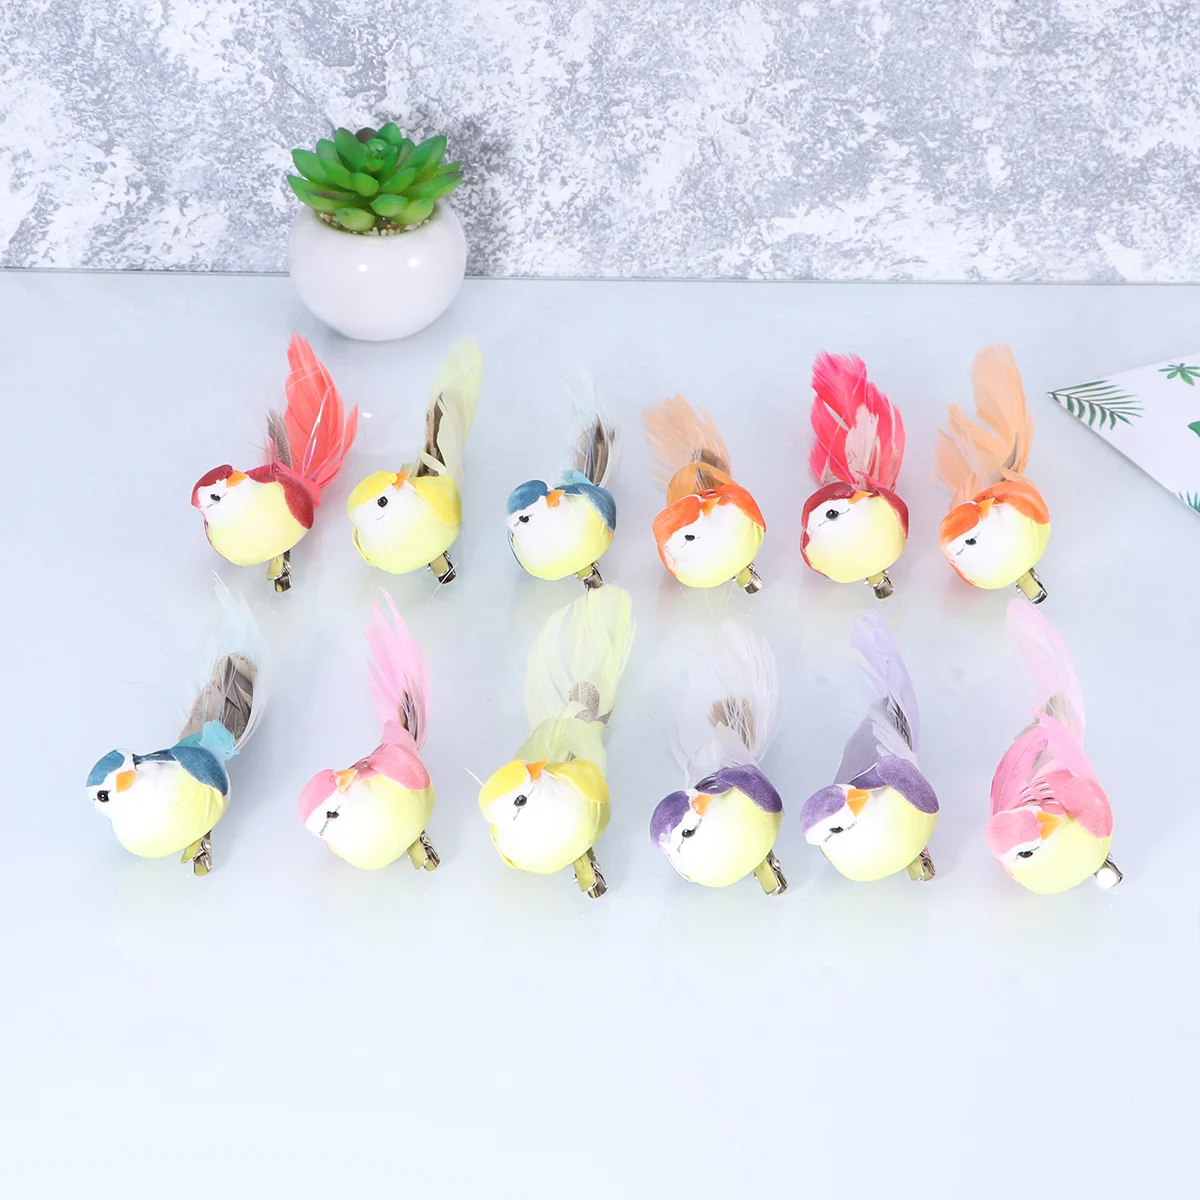 12 Pcs Birds Decoration Decorations House Home Hanging Fake Feathered Lifelike Outdoor Wedding Fuax Accessories